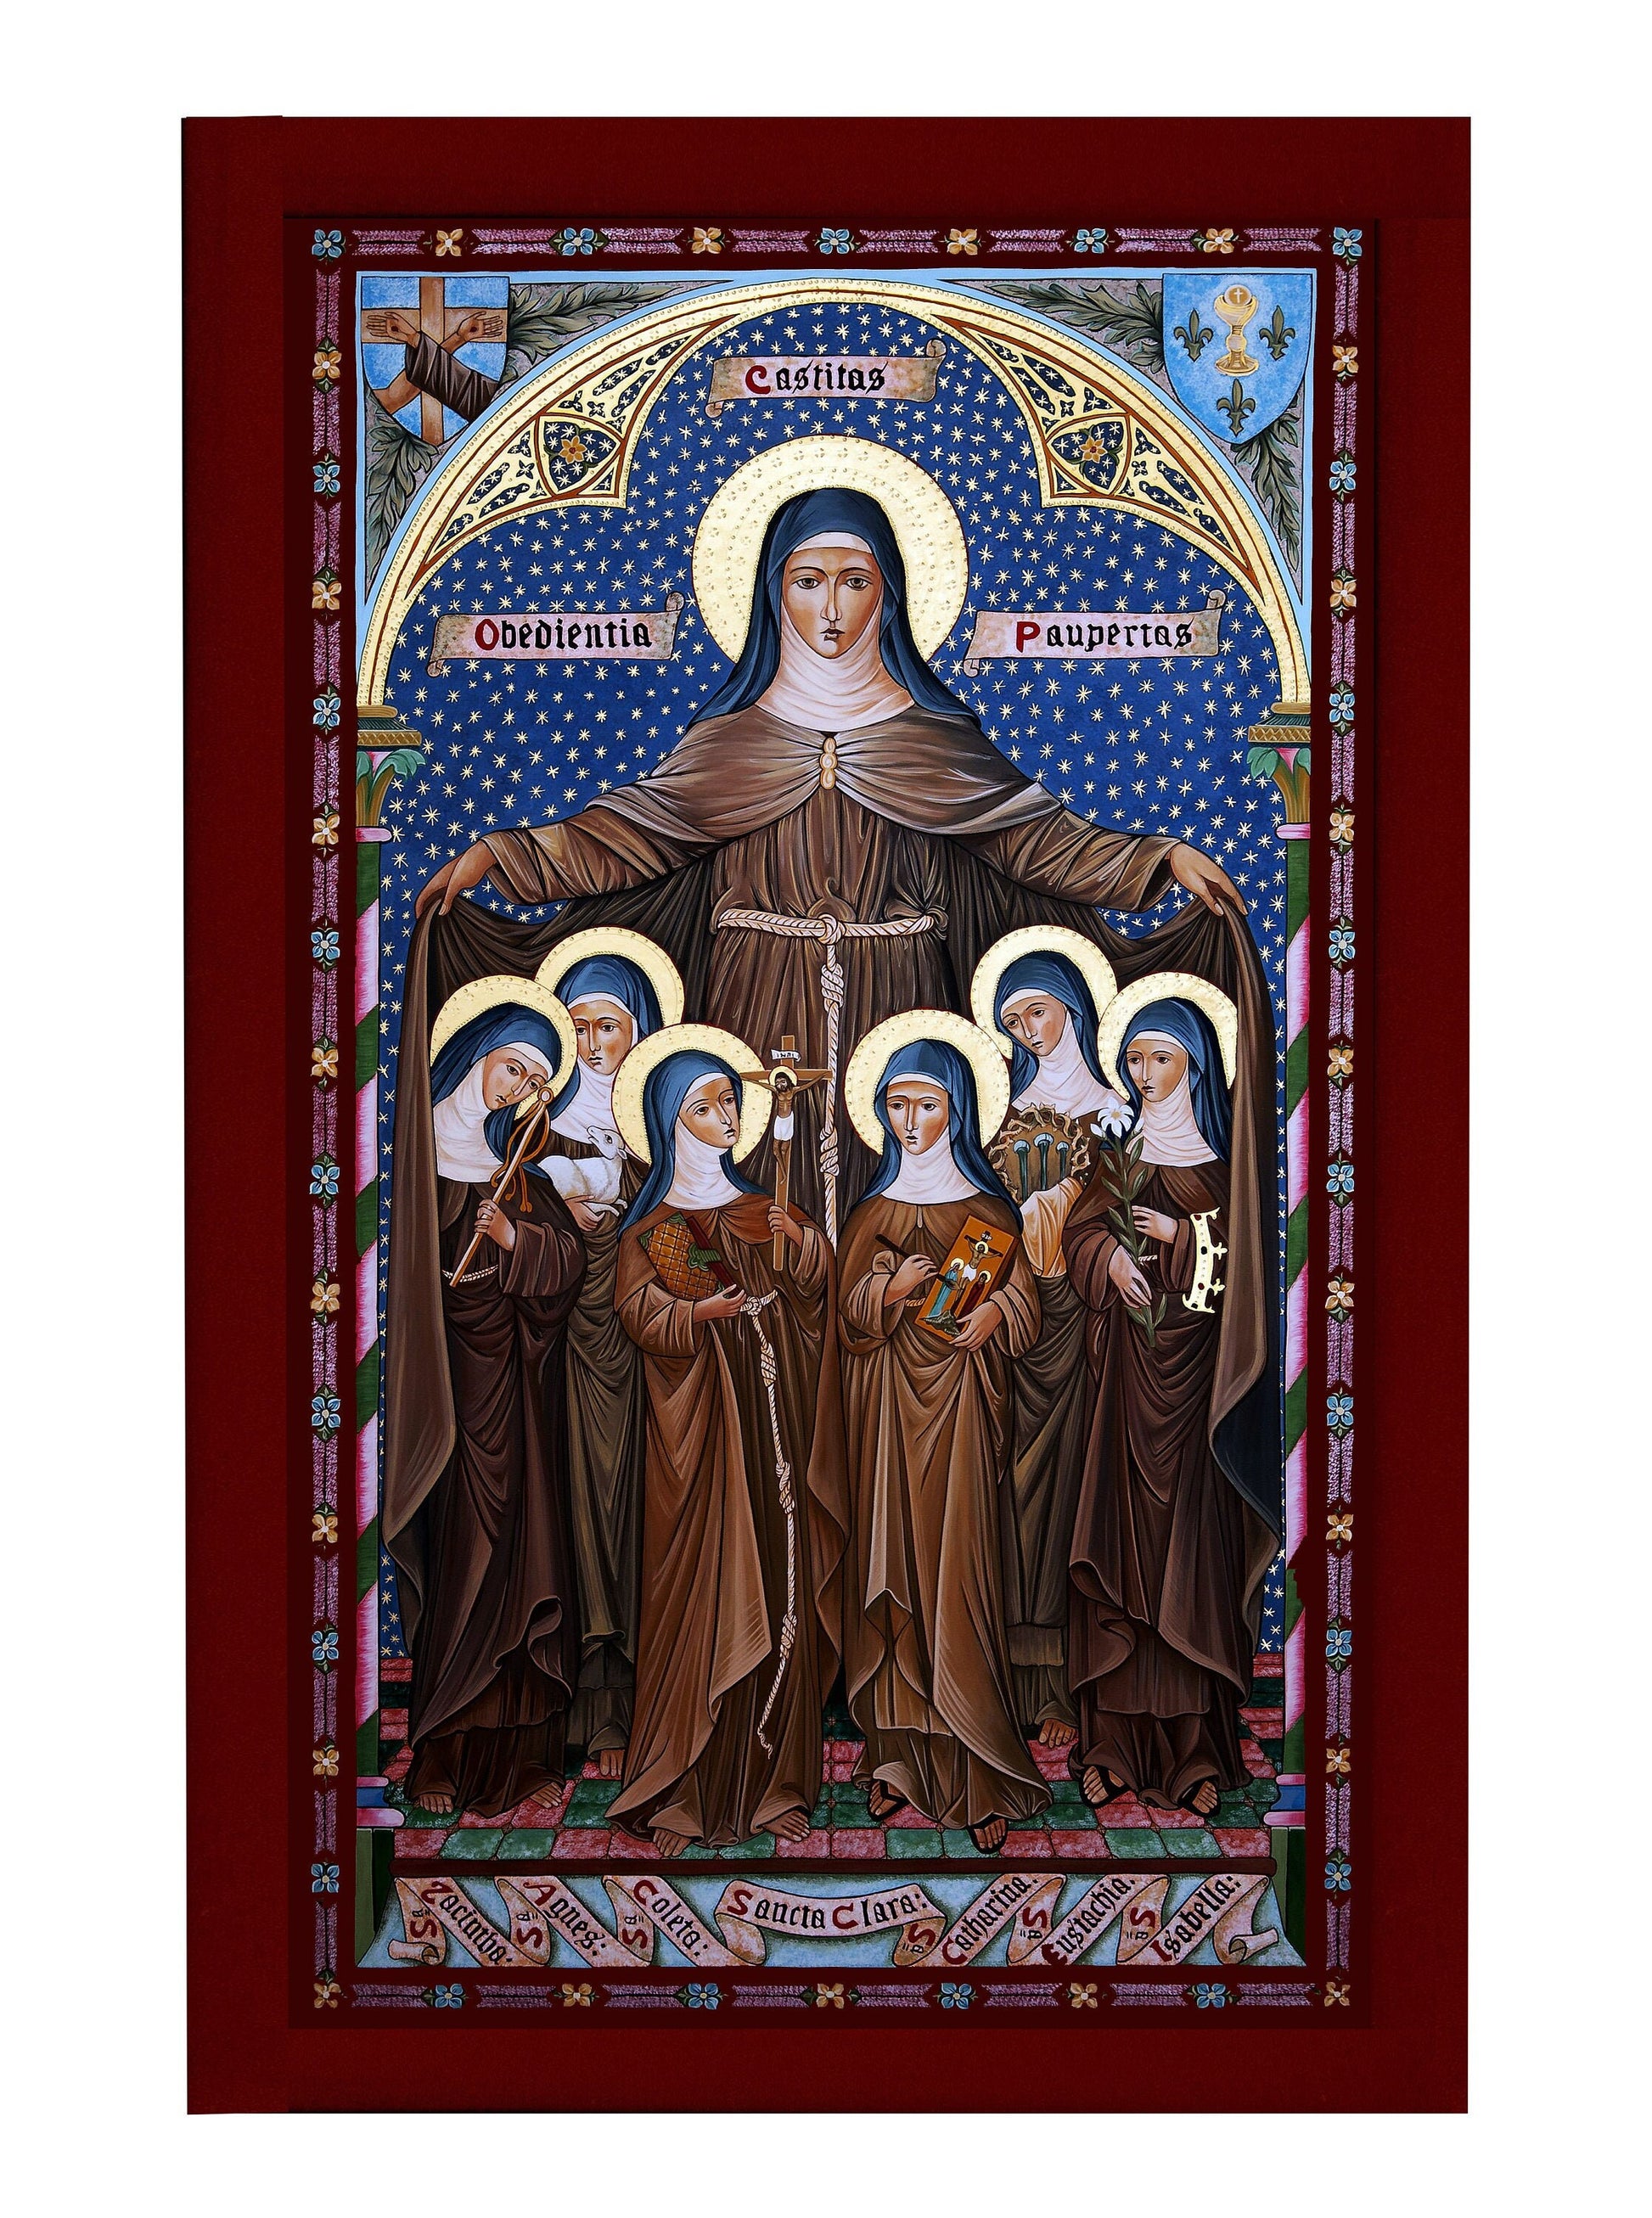 Saint Clare of Assisi icon, Handmade Catholic icon of Santa Clara de Assis, Wall hanging wood plaque St Clare of Assisi, religious decor TheHolyArt